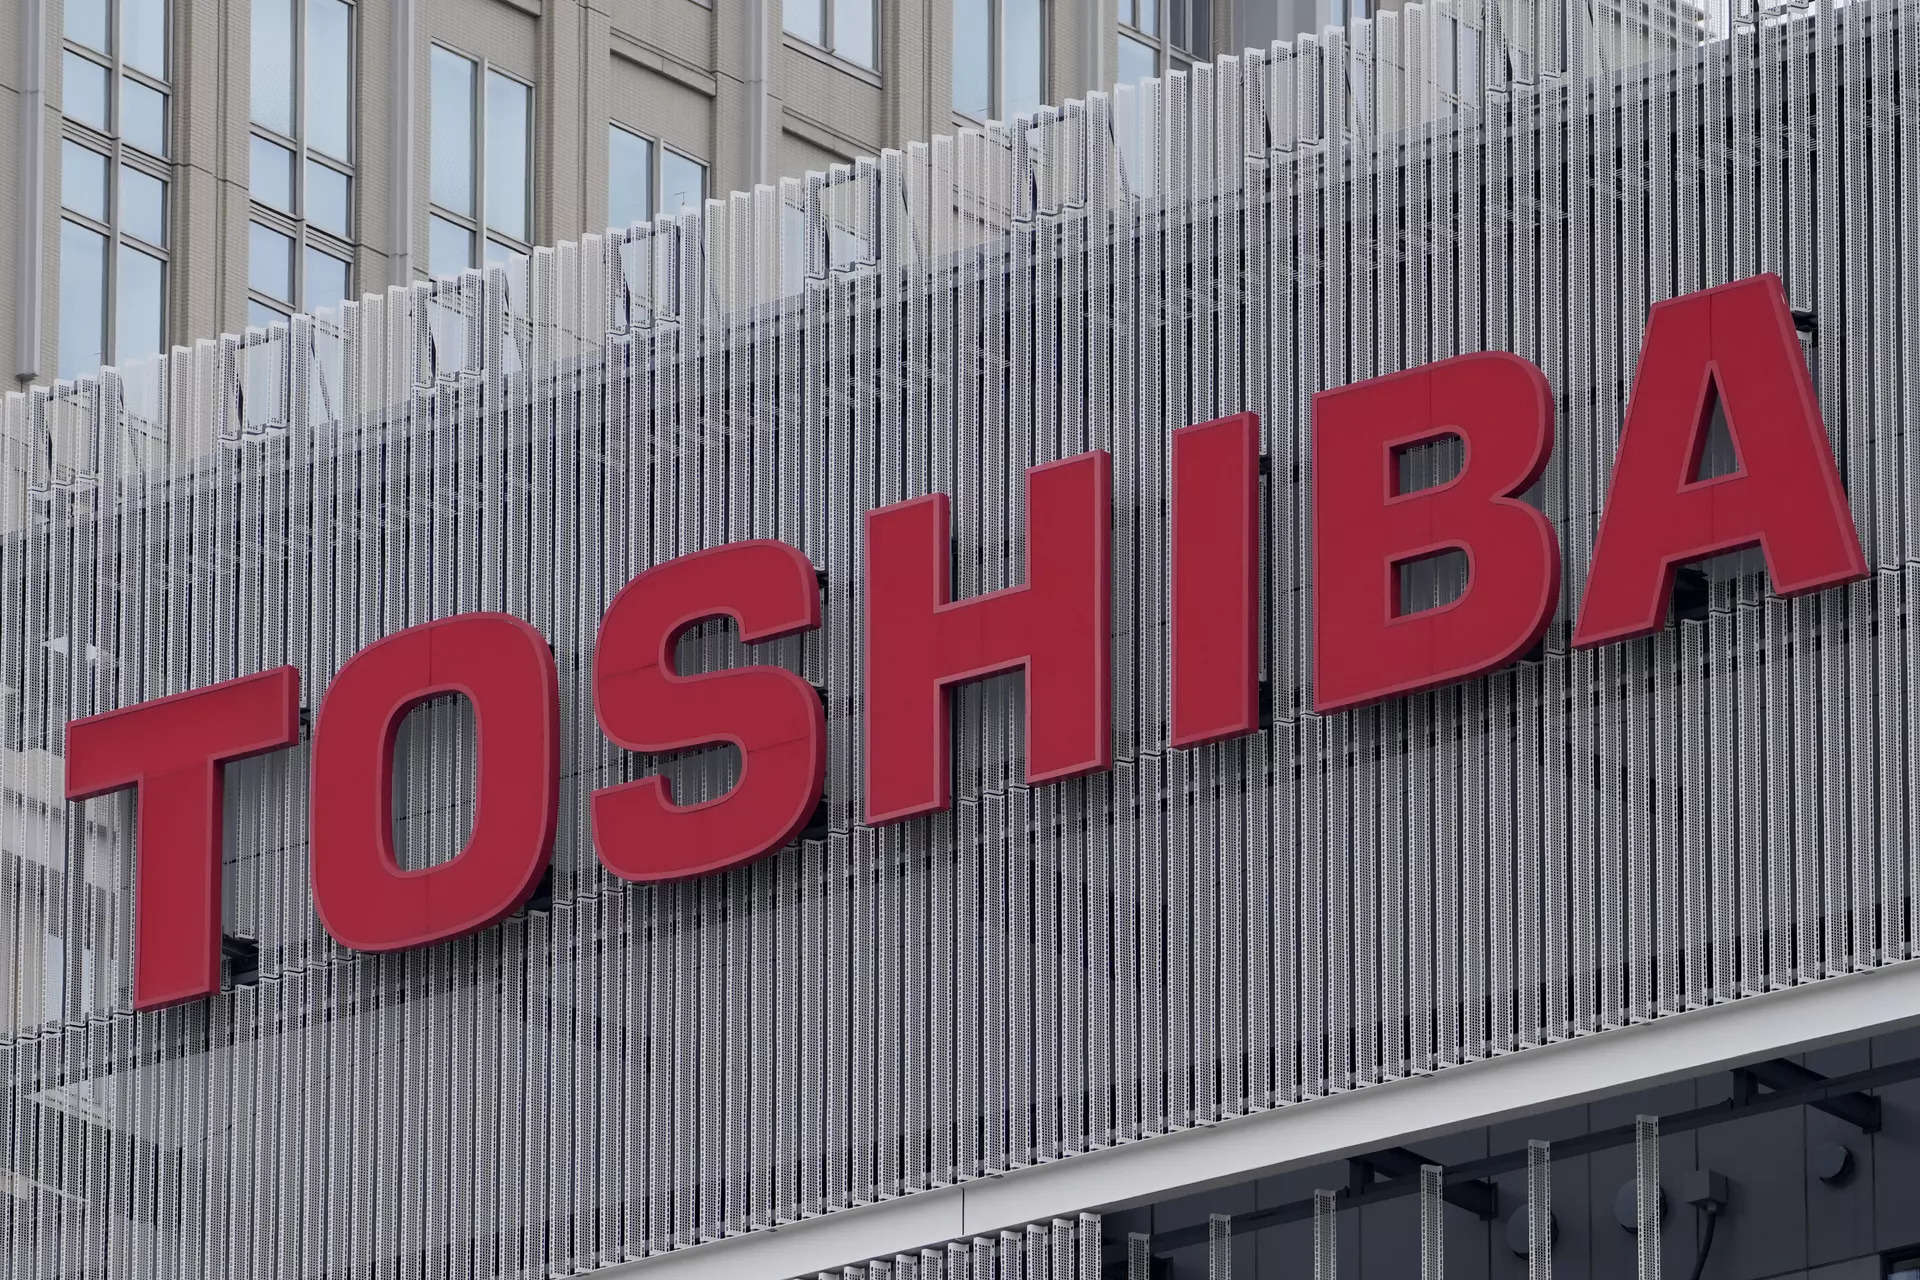 Toshiba to be delisted after 74 years, faces future with new owners 